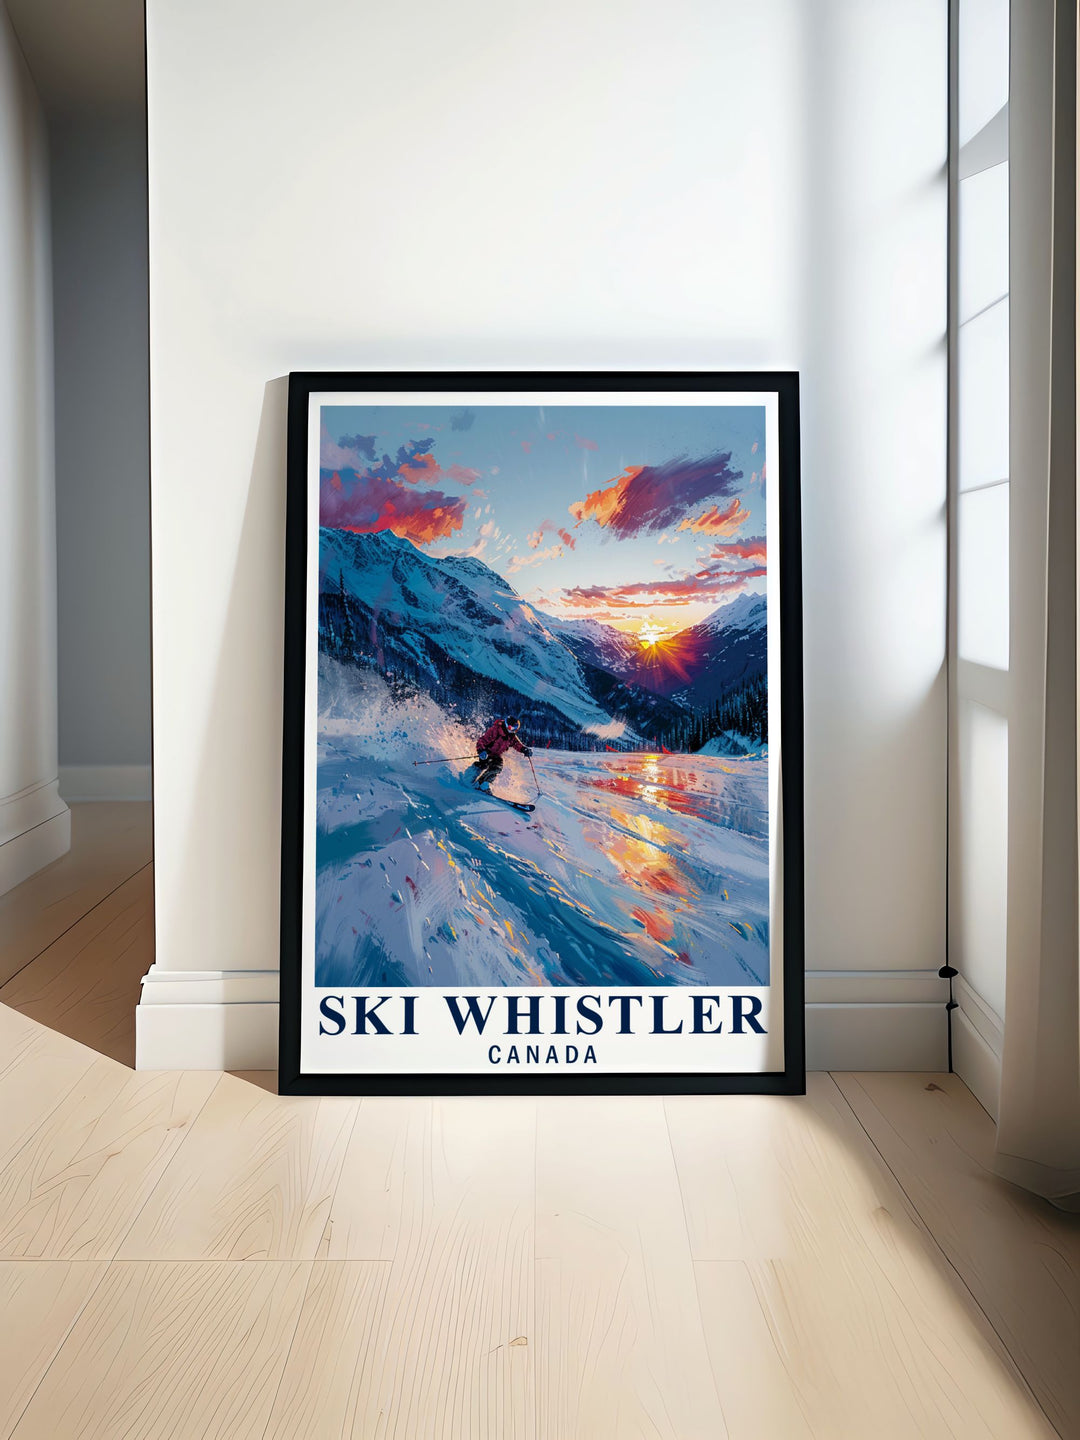 Whistler Ski Resort is beautifully illustrated in this poster, featuring its well groomed trails and powdery snow, making it an excellent addition for those who dream of an exhilarating winter adventure in Canada.